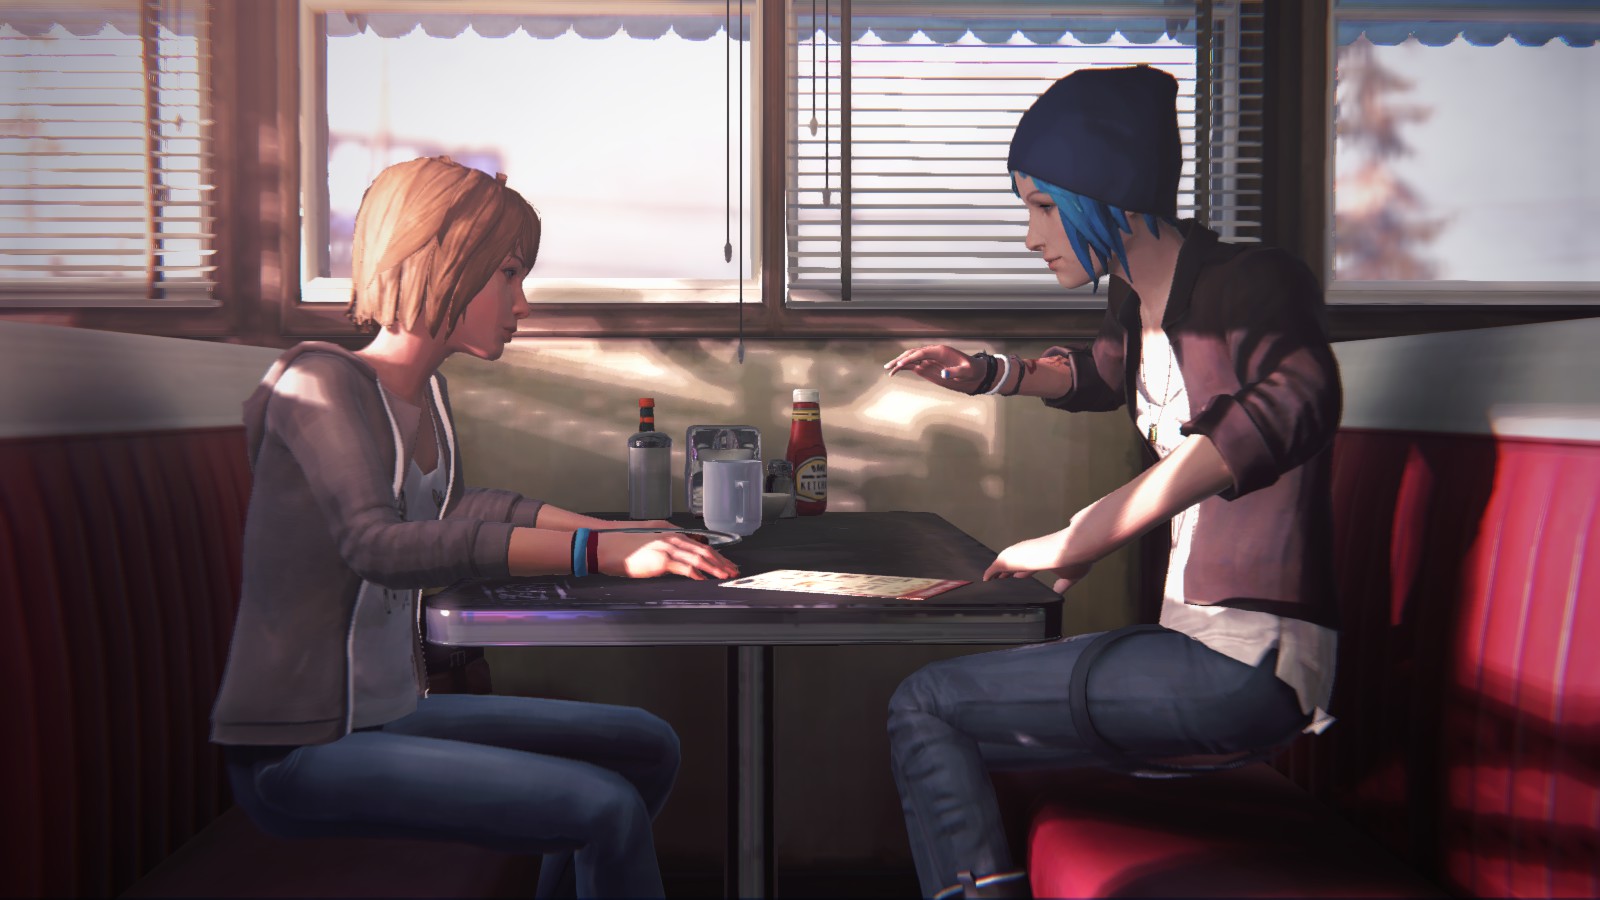 General 1600x900 Life Is Strange Two Whales Diner Max Caulfield Chloe Price video games video game characters